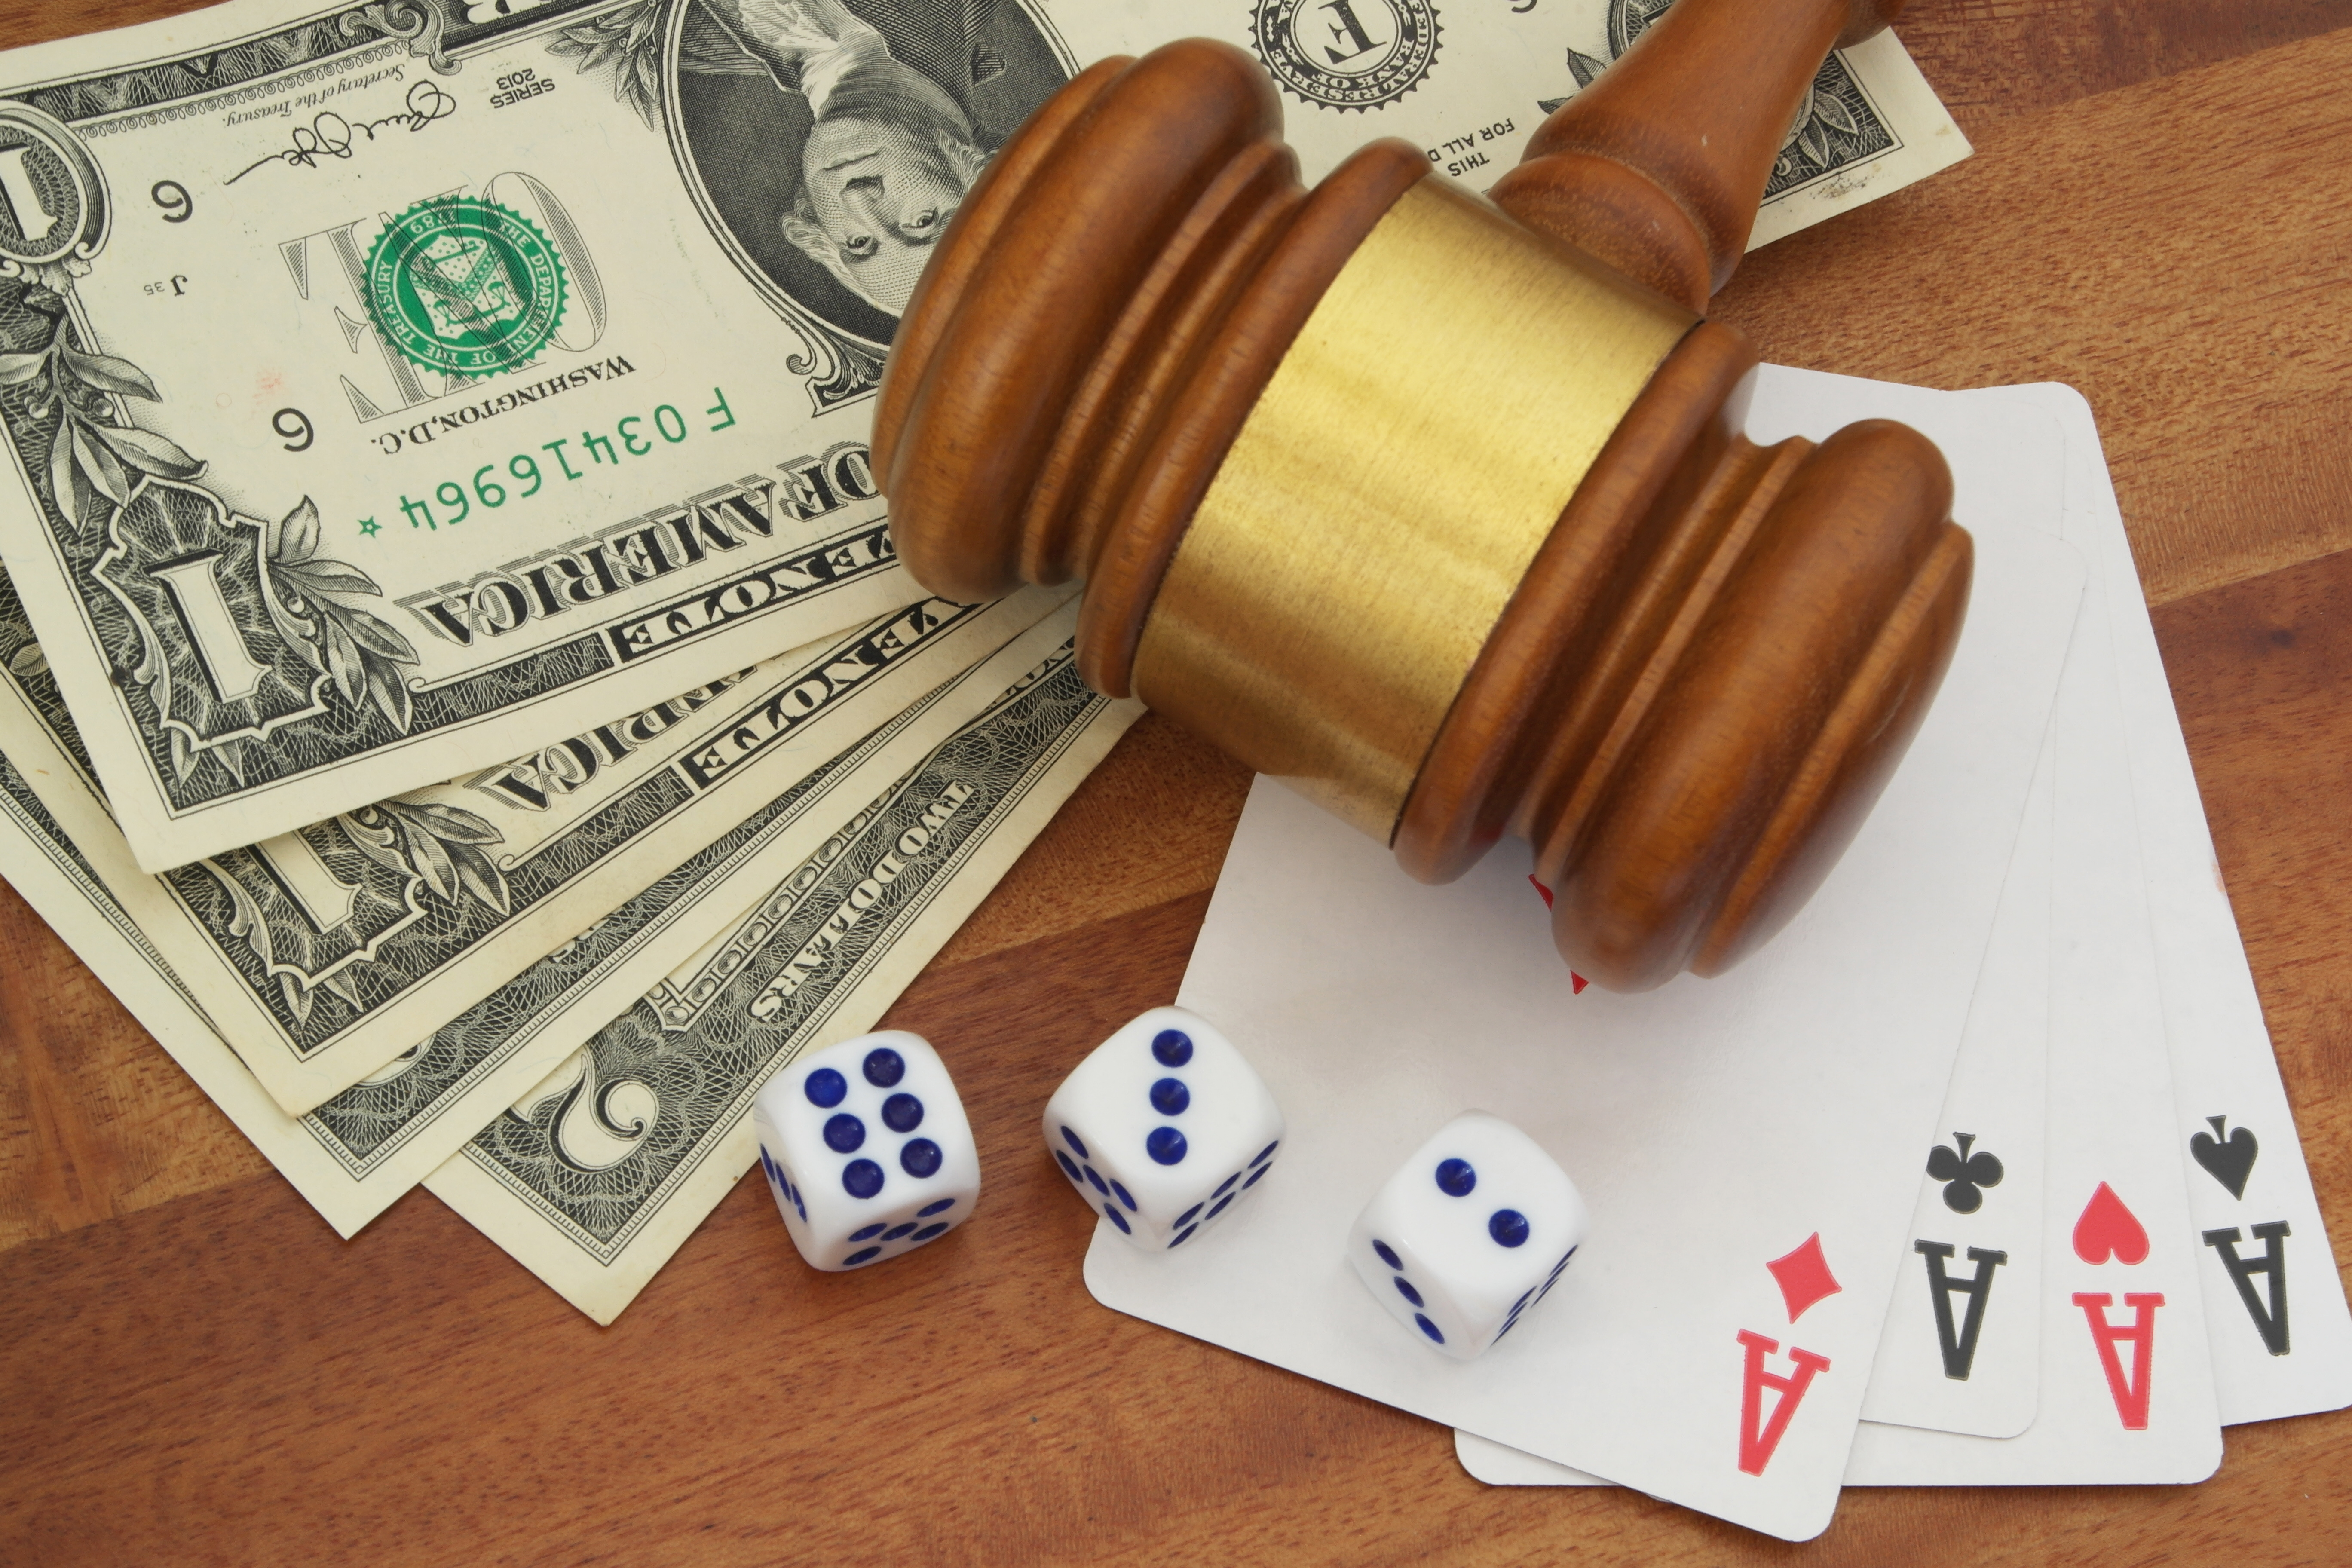 Gavel lying on top of cash and playing cards, with dice nearby.